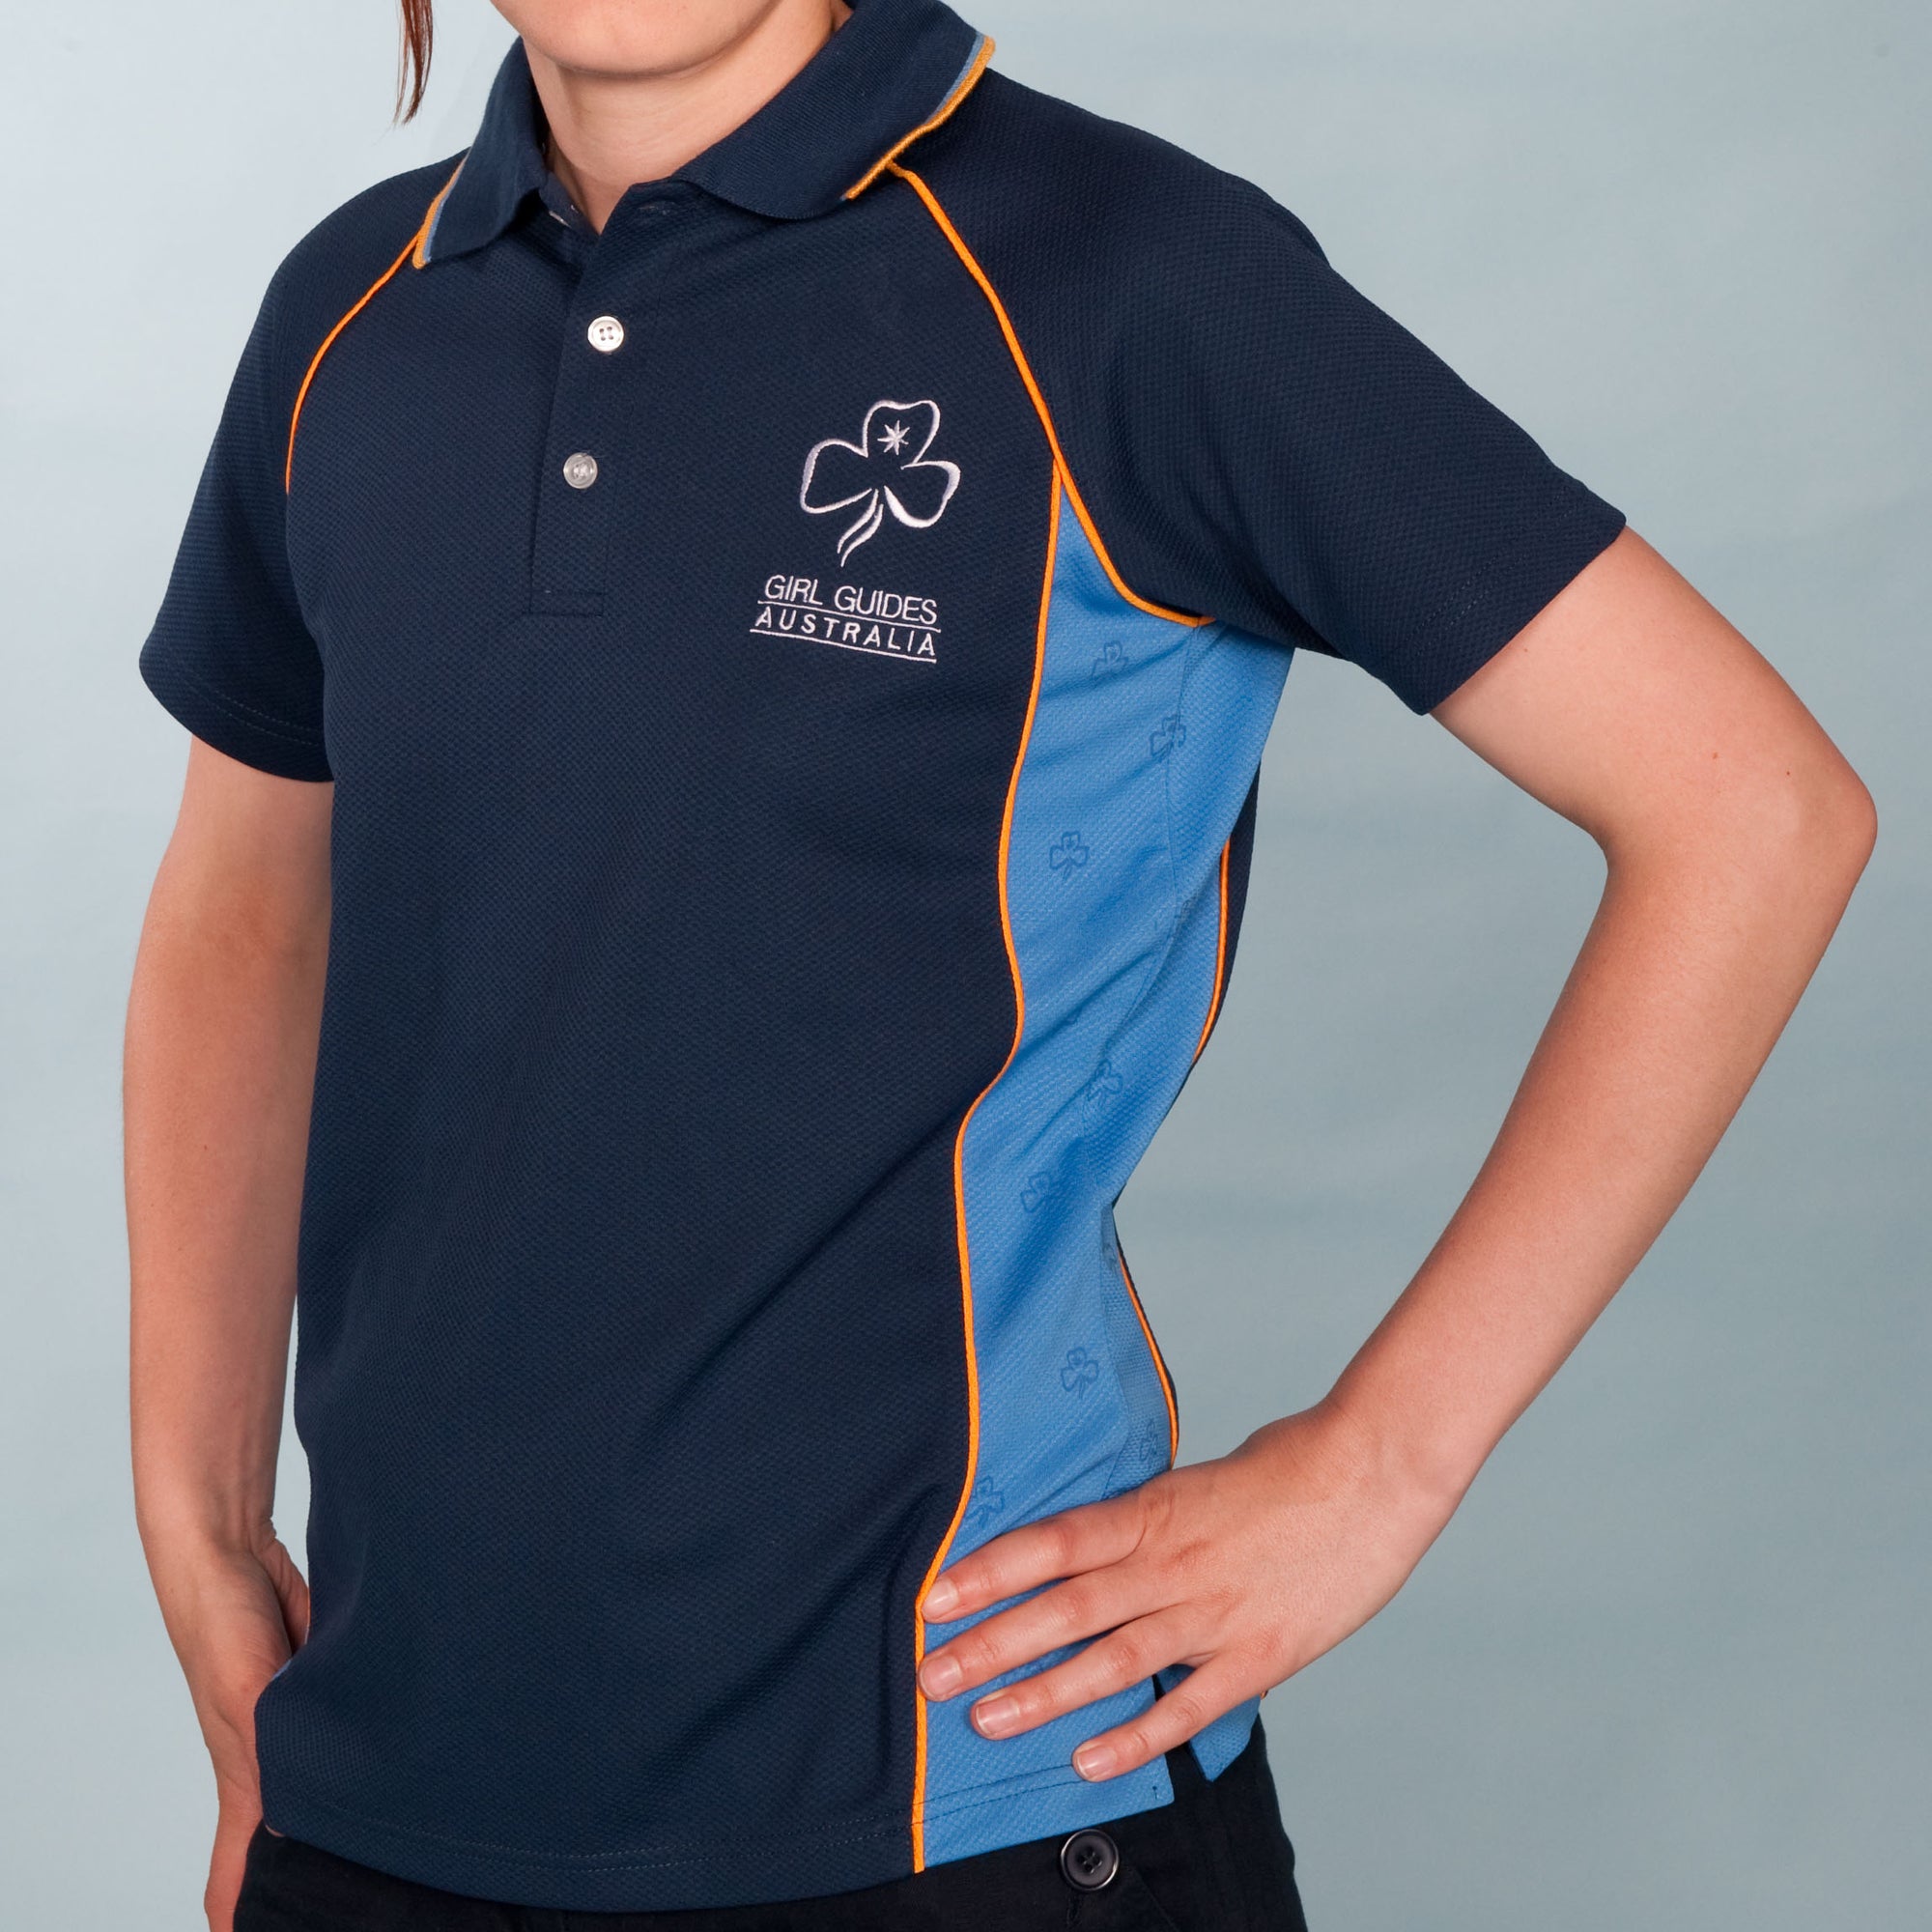 navy blue polo shirt with light blue inserts in the sides with gold trim with the trefoil and girl guides Australia on the left top section, available in sizes ranging from six to thirty eight